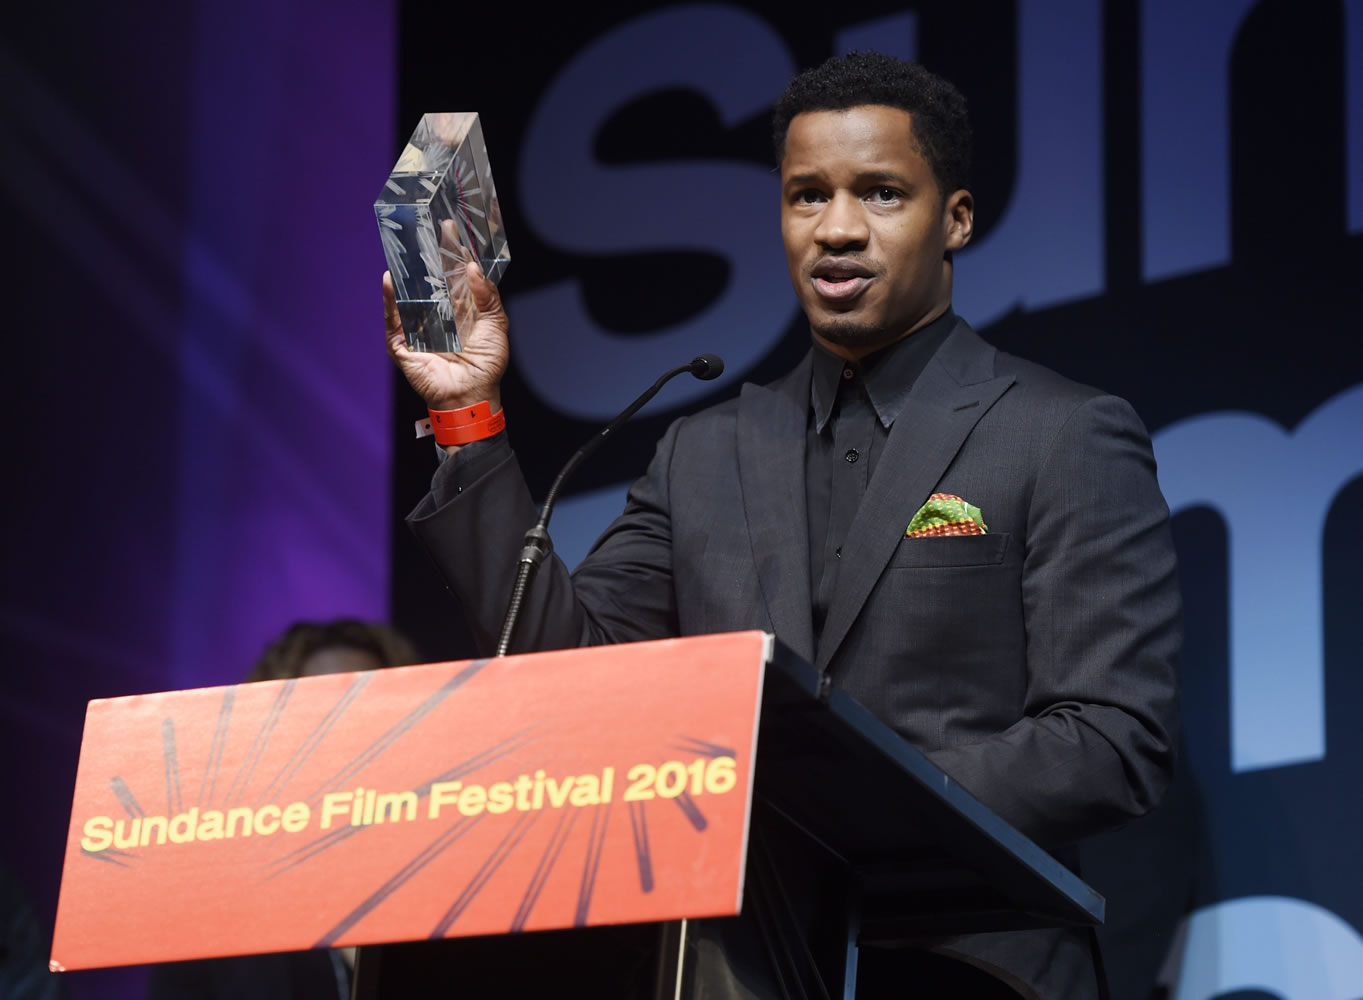 Nate Parker, the star, director and producer of &quot;The Birth of a Nation,&quot; holds the U.S. Dramatic Audience Award for the film Saturday at the 2016 Sundance Film Festival awards ceremony in Park City, Utah. The film also won the U.S. Grand Jury Prize: Dramatic award.